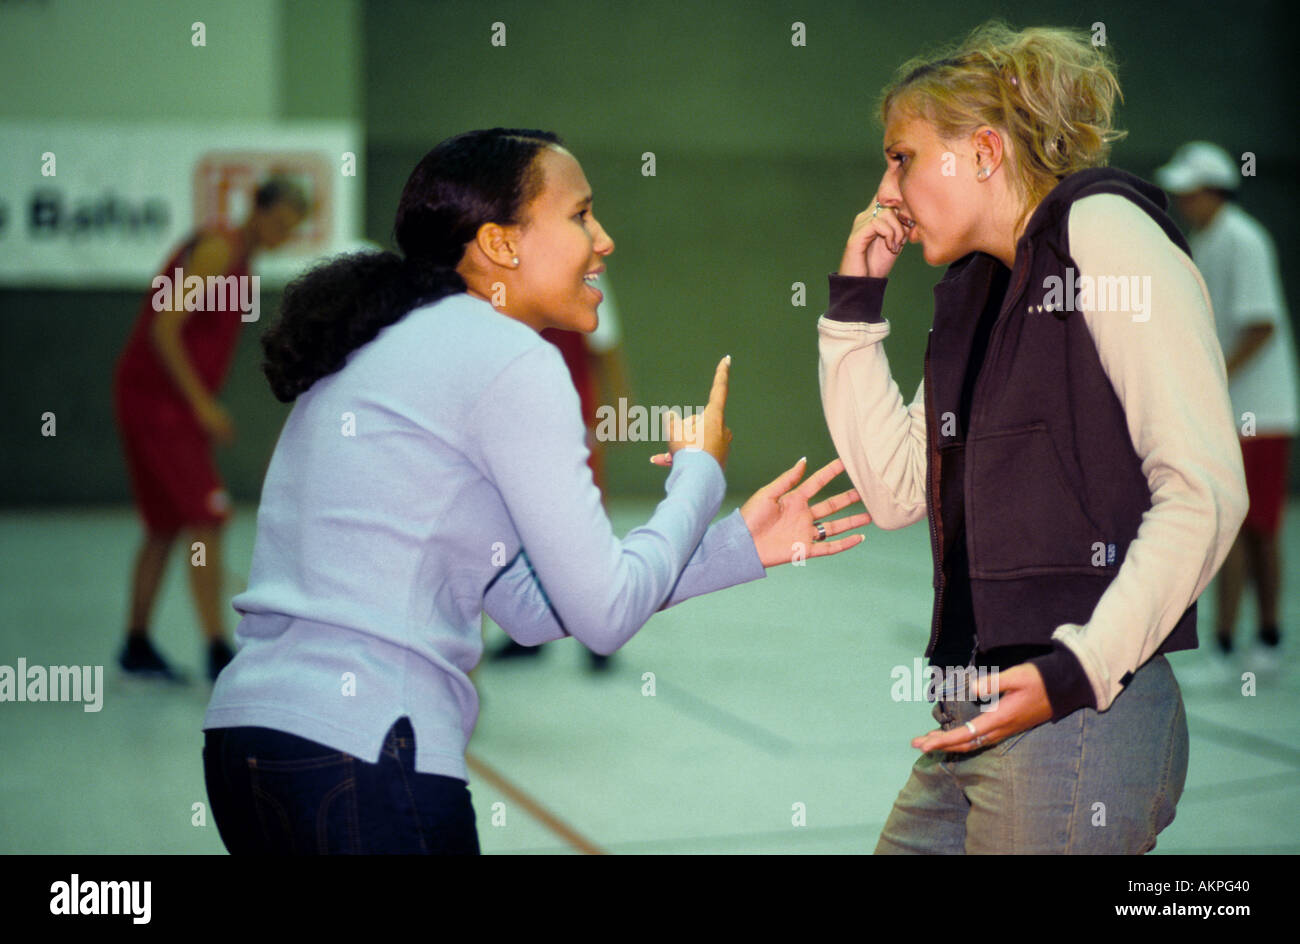 Germany Free time Two young women in a gymnasium discussion  Stock Photo